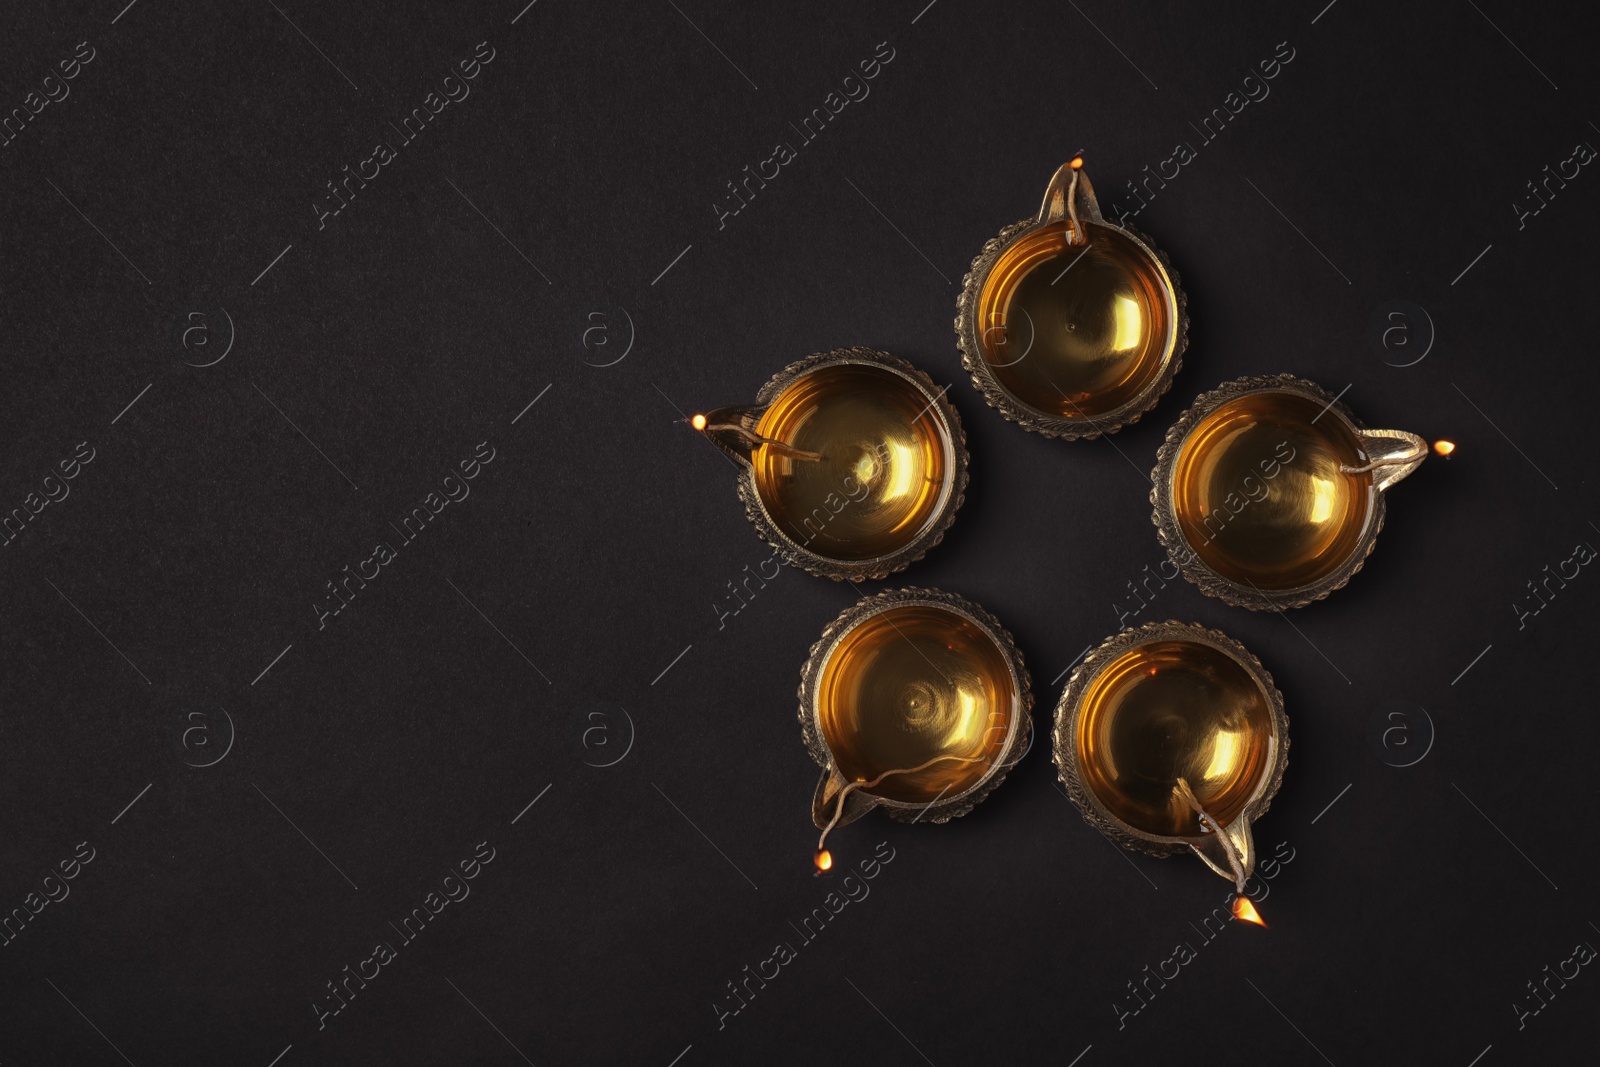 Photo of Diwali diyas or clay lamps on dark background, top view